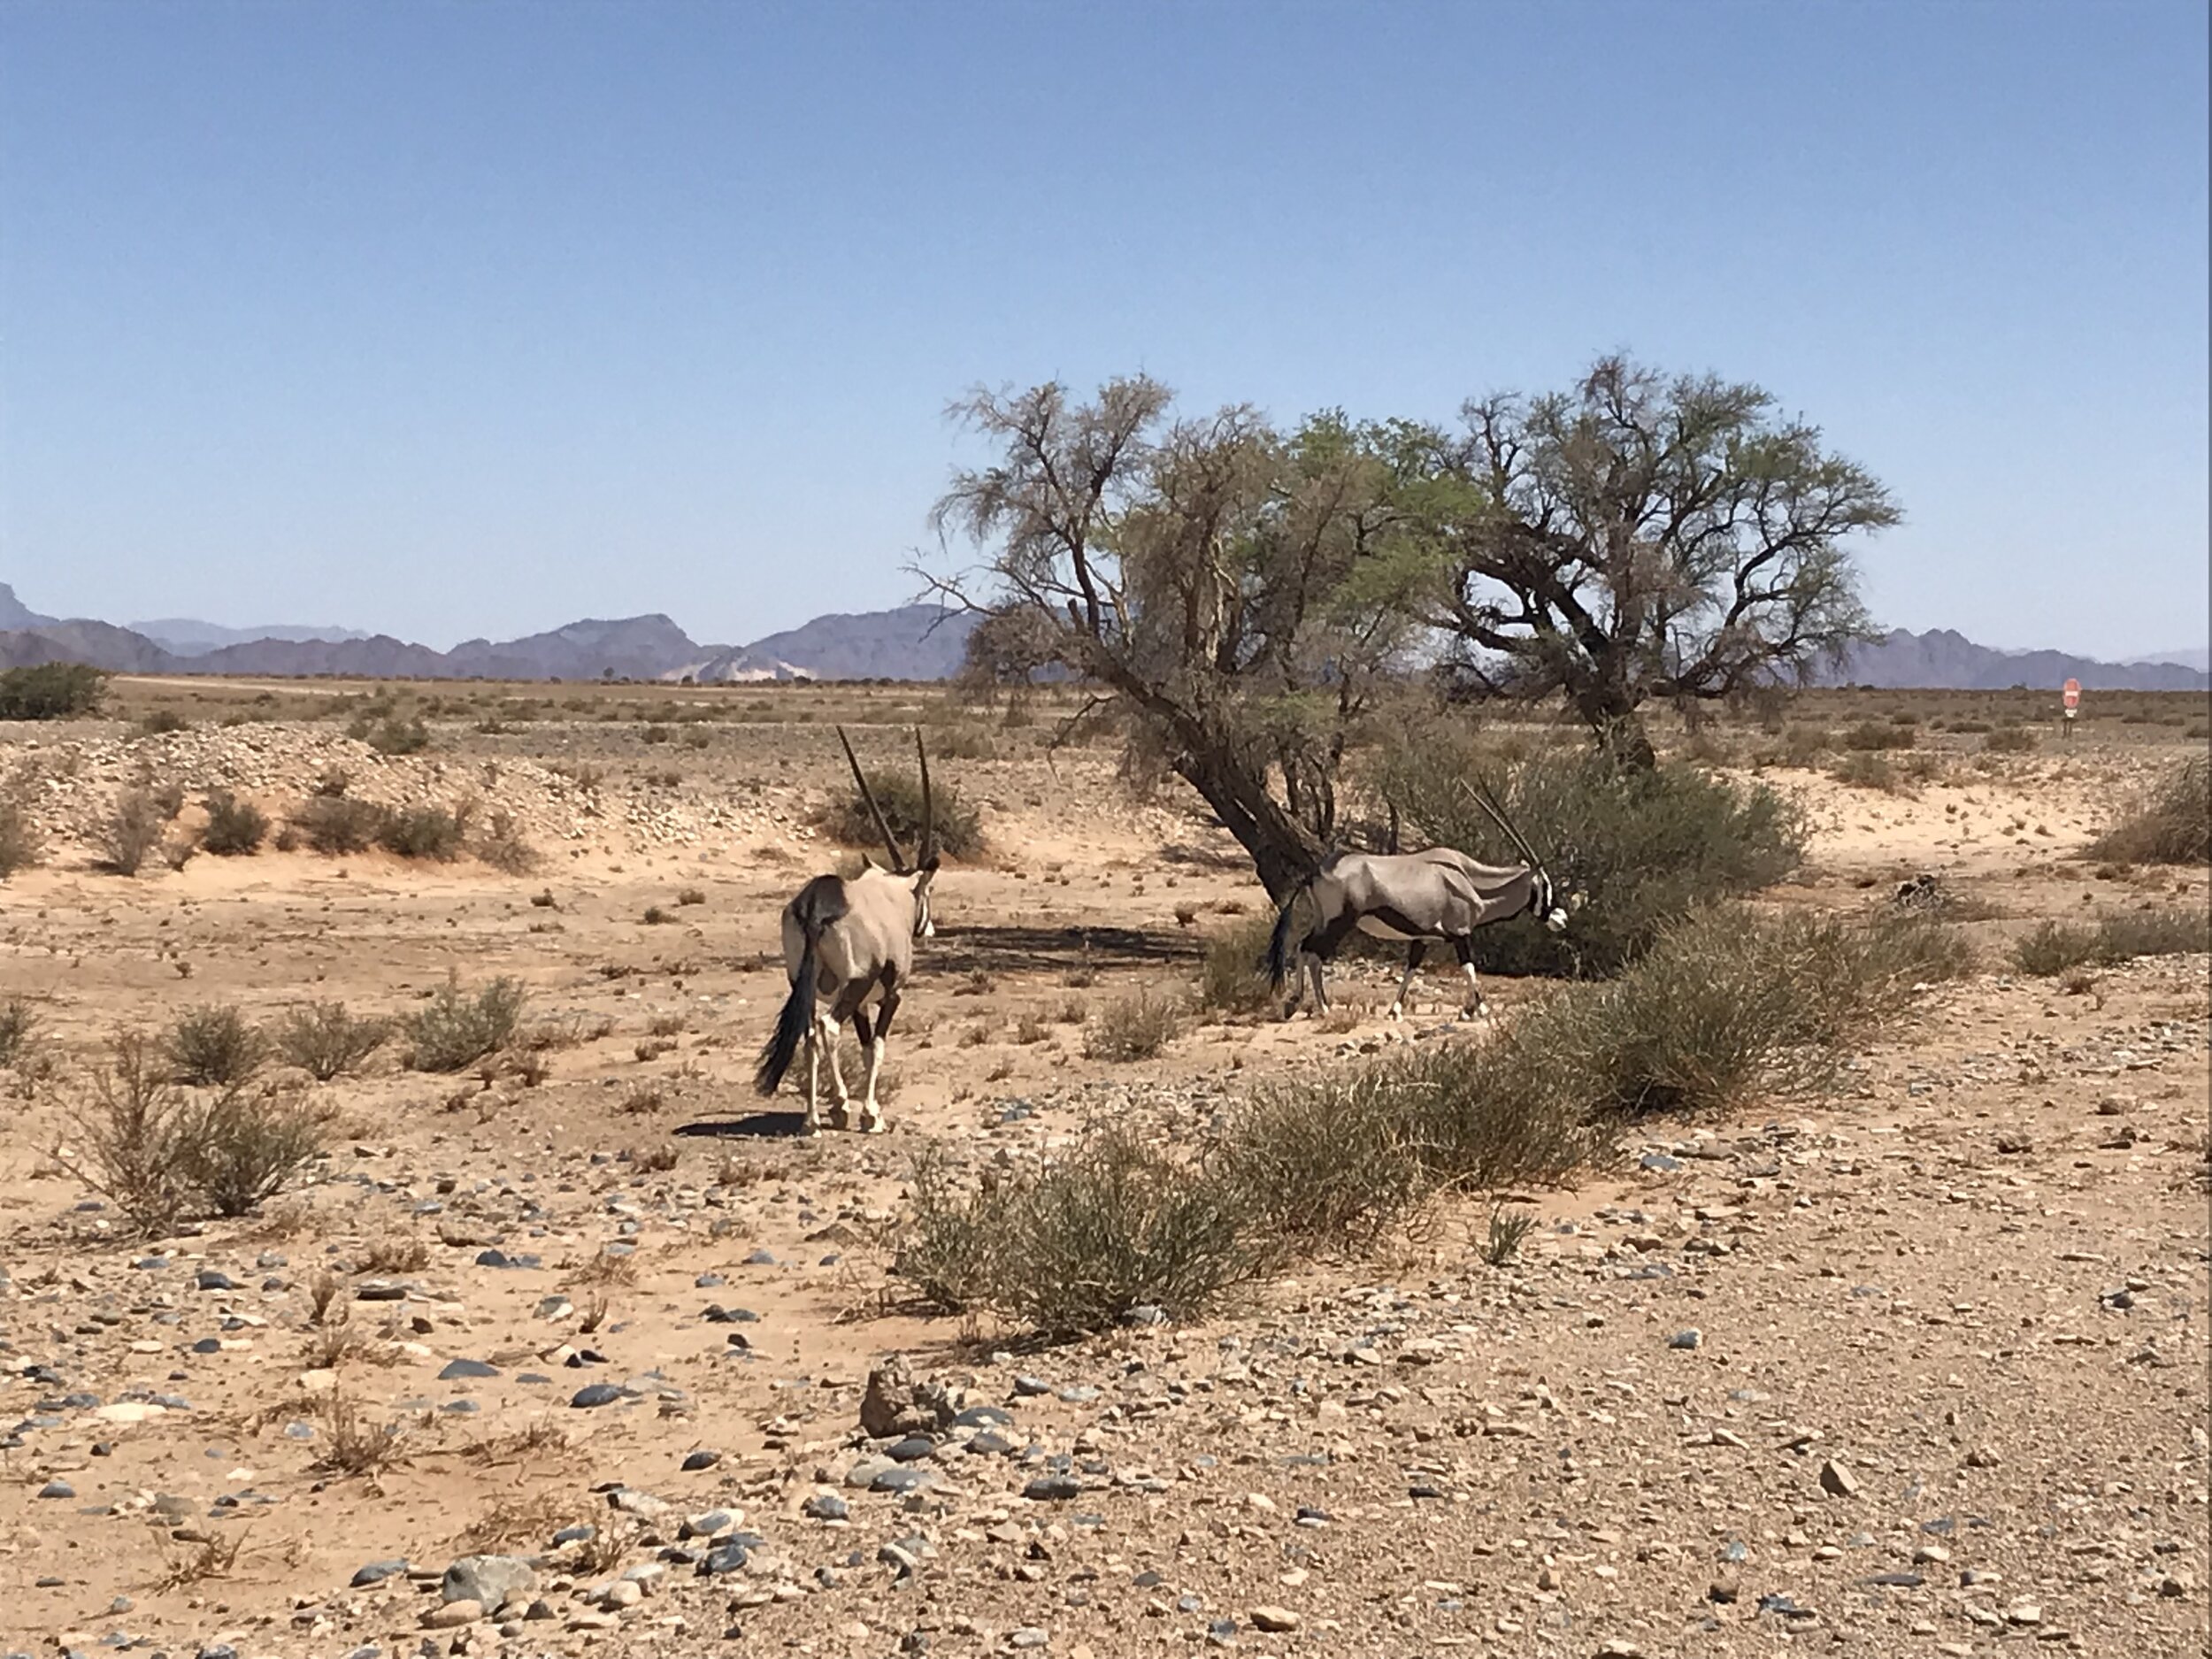 Hardap, Namibia. December 12th. PICTURED: Two oryx, Namibia’s national animal, craze on the roadside brush in an area where they can freely cross the road.